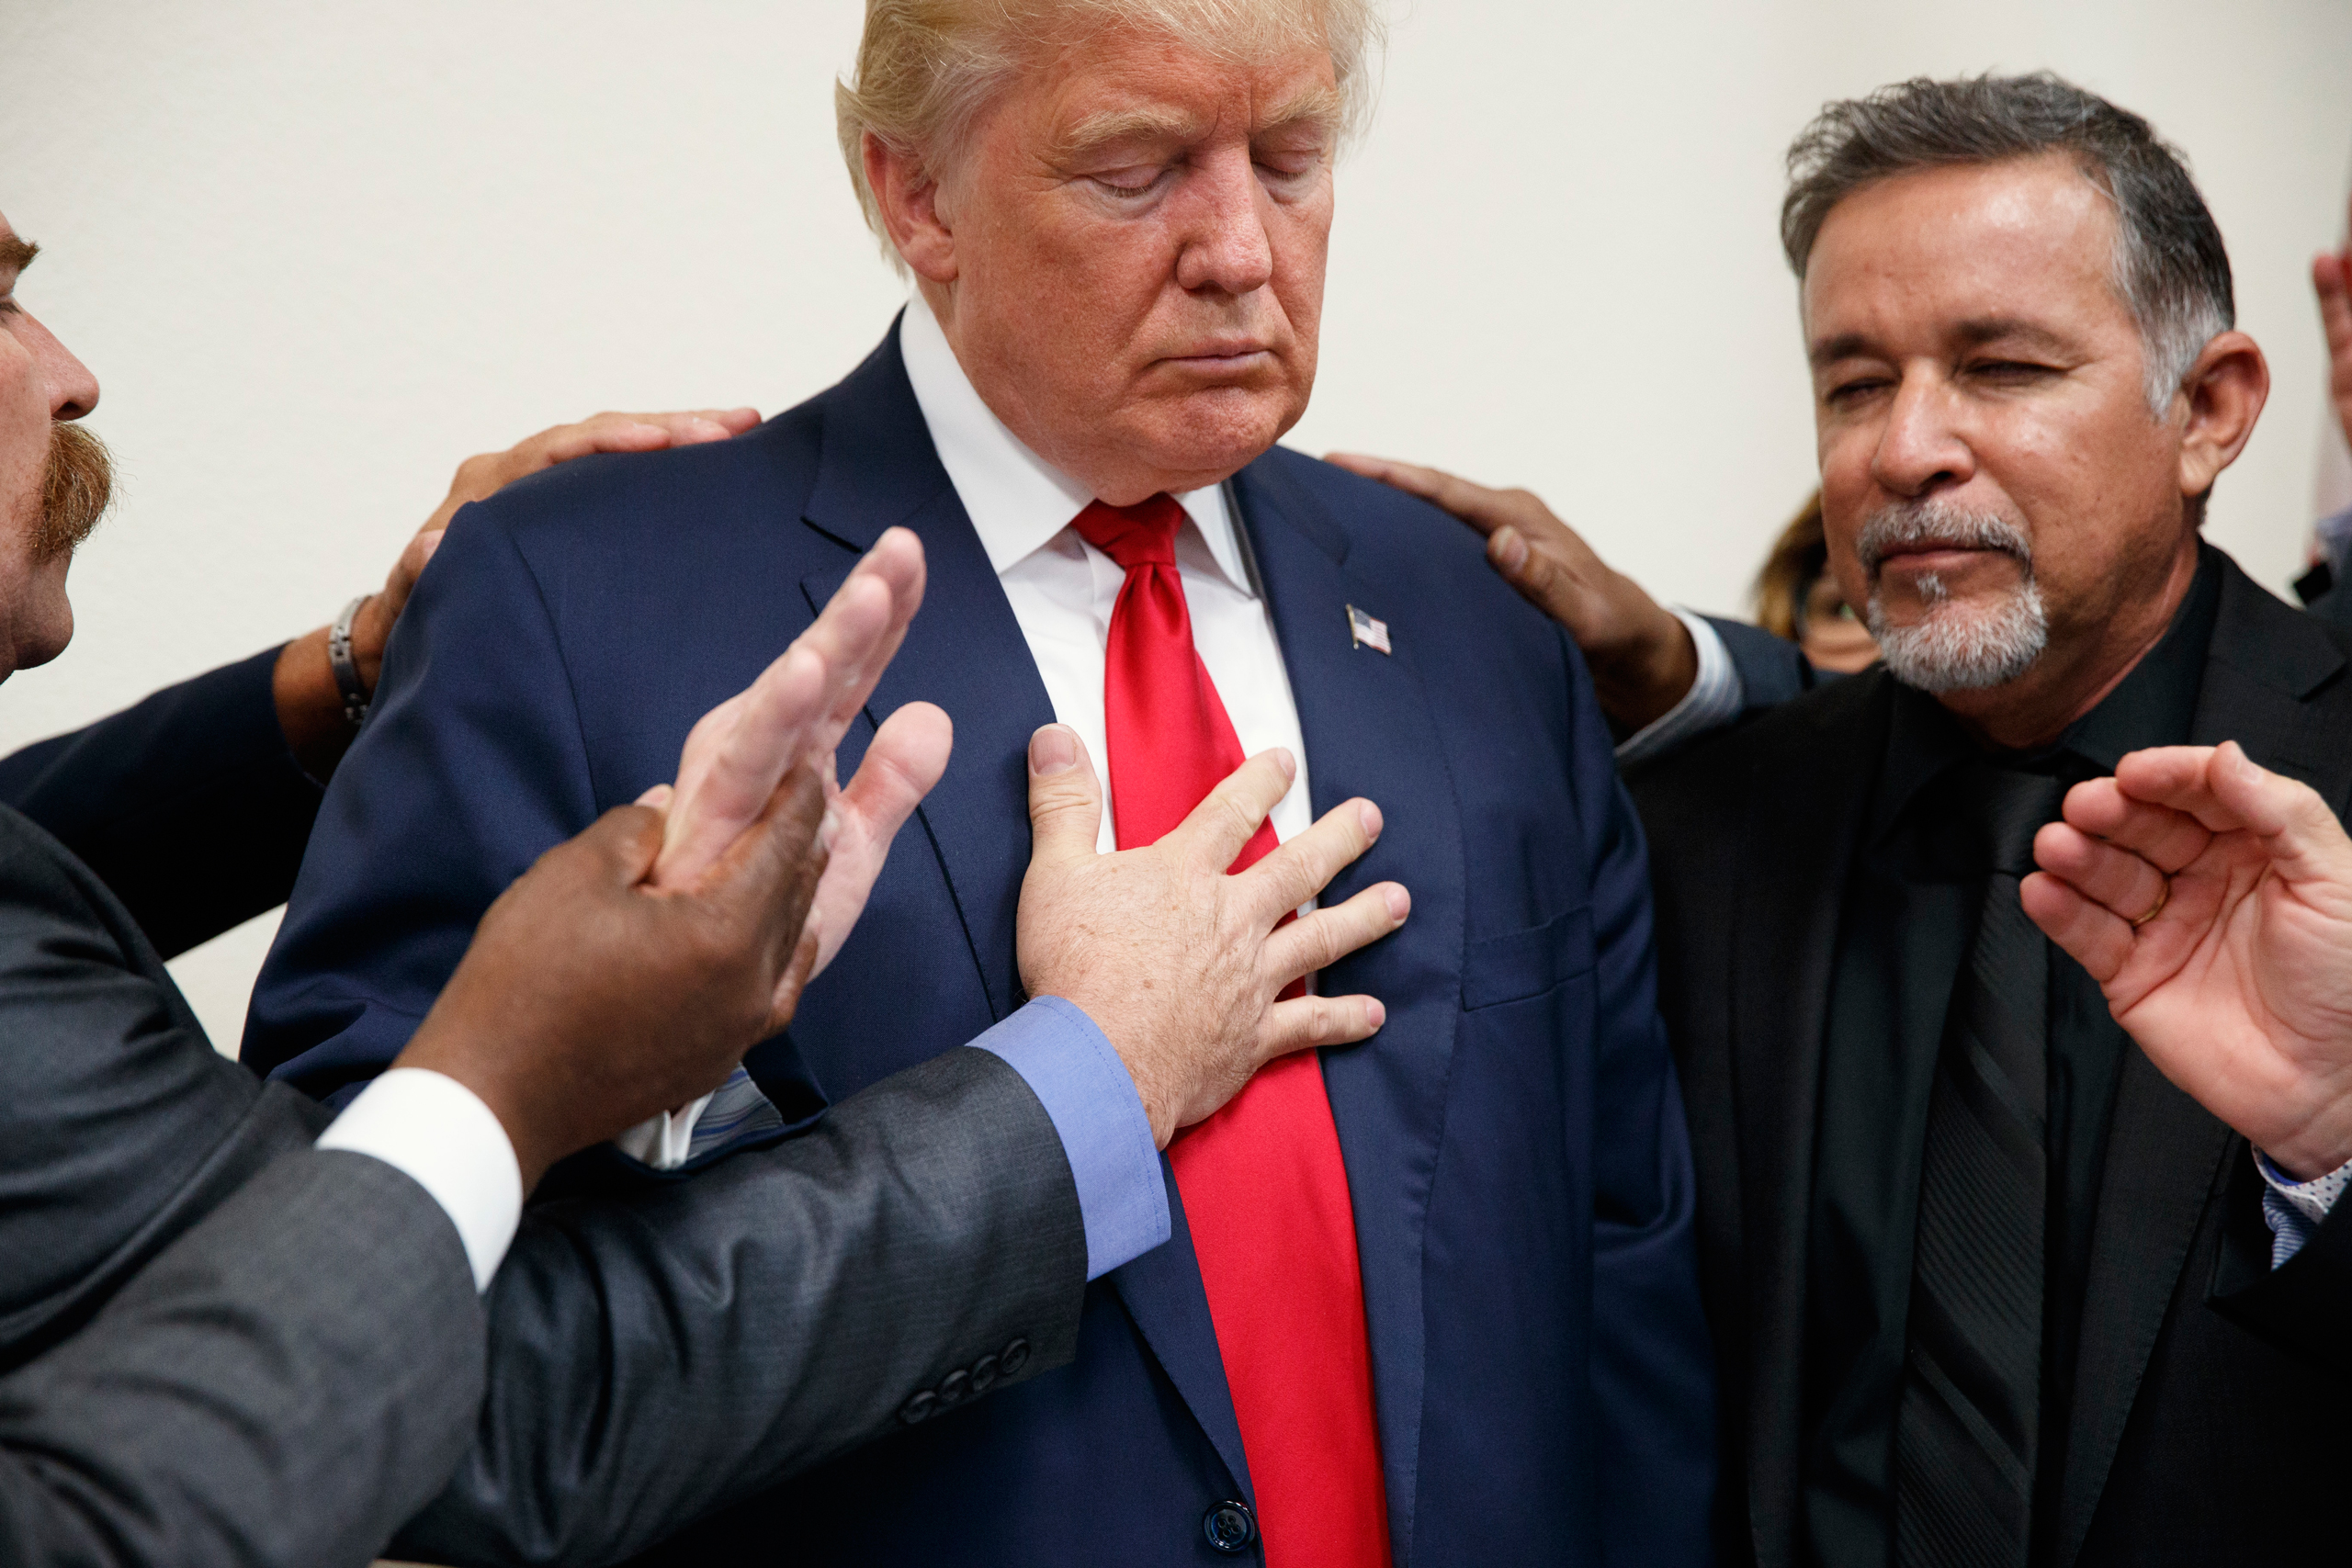 Pastors from the Las Vegas area pray with Republican presidential candidate Donald Trump during a visit to the International Church of Las Vegas and International Christian Academy in Las Vegas on Oct. 5, 2016. (Evan Vucci—AP)